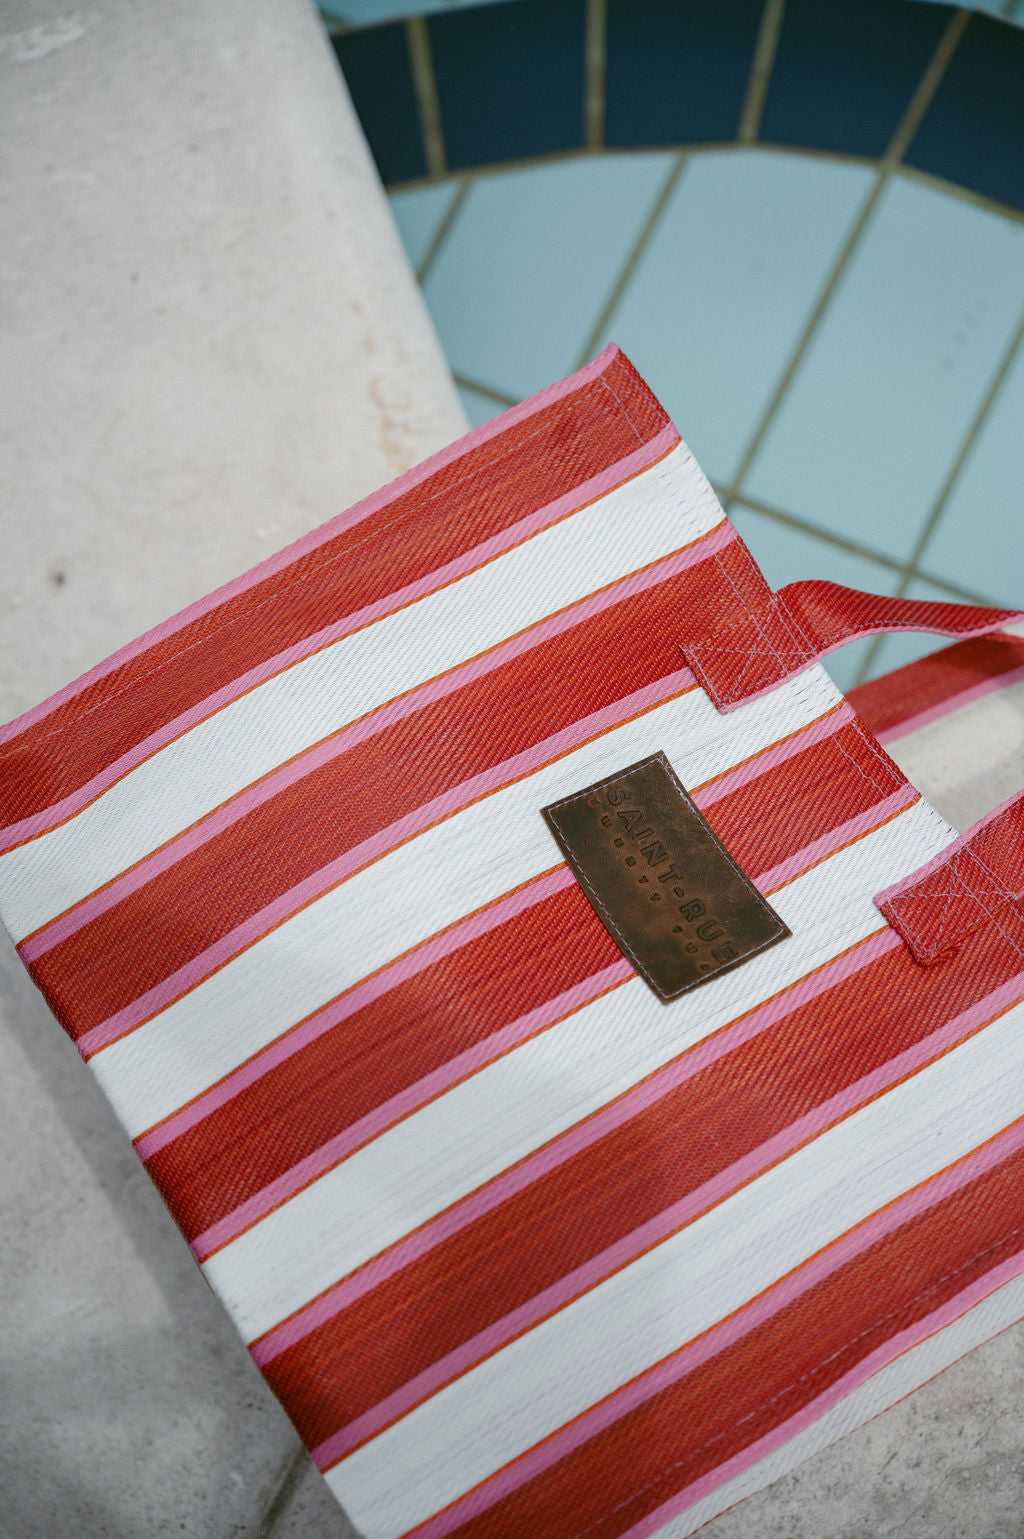 Saint Rue 22 Small Tote - Red, White and Pink